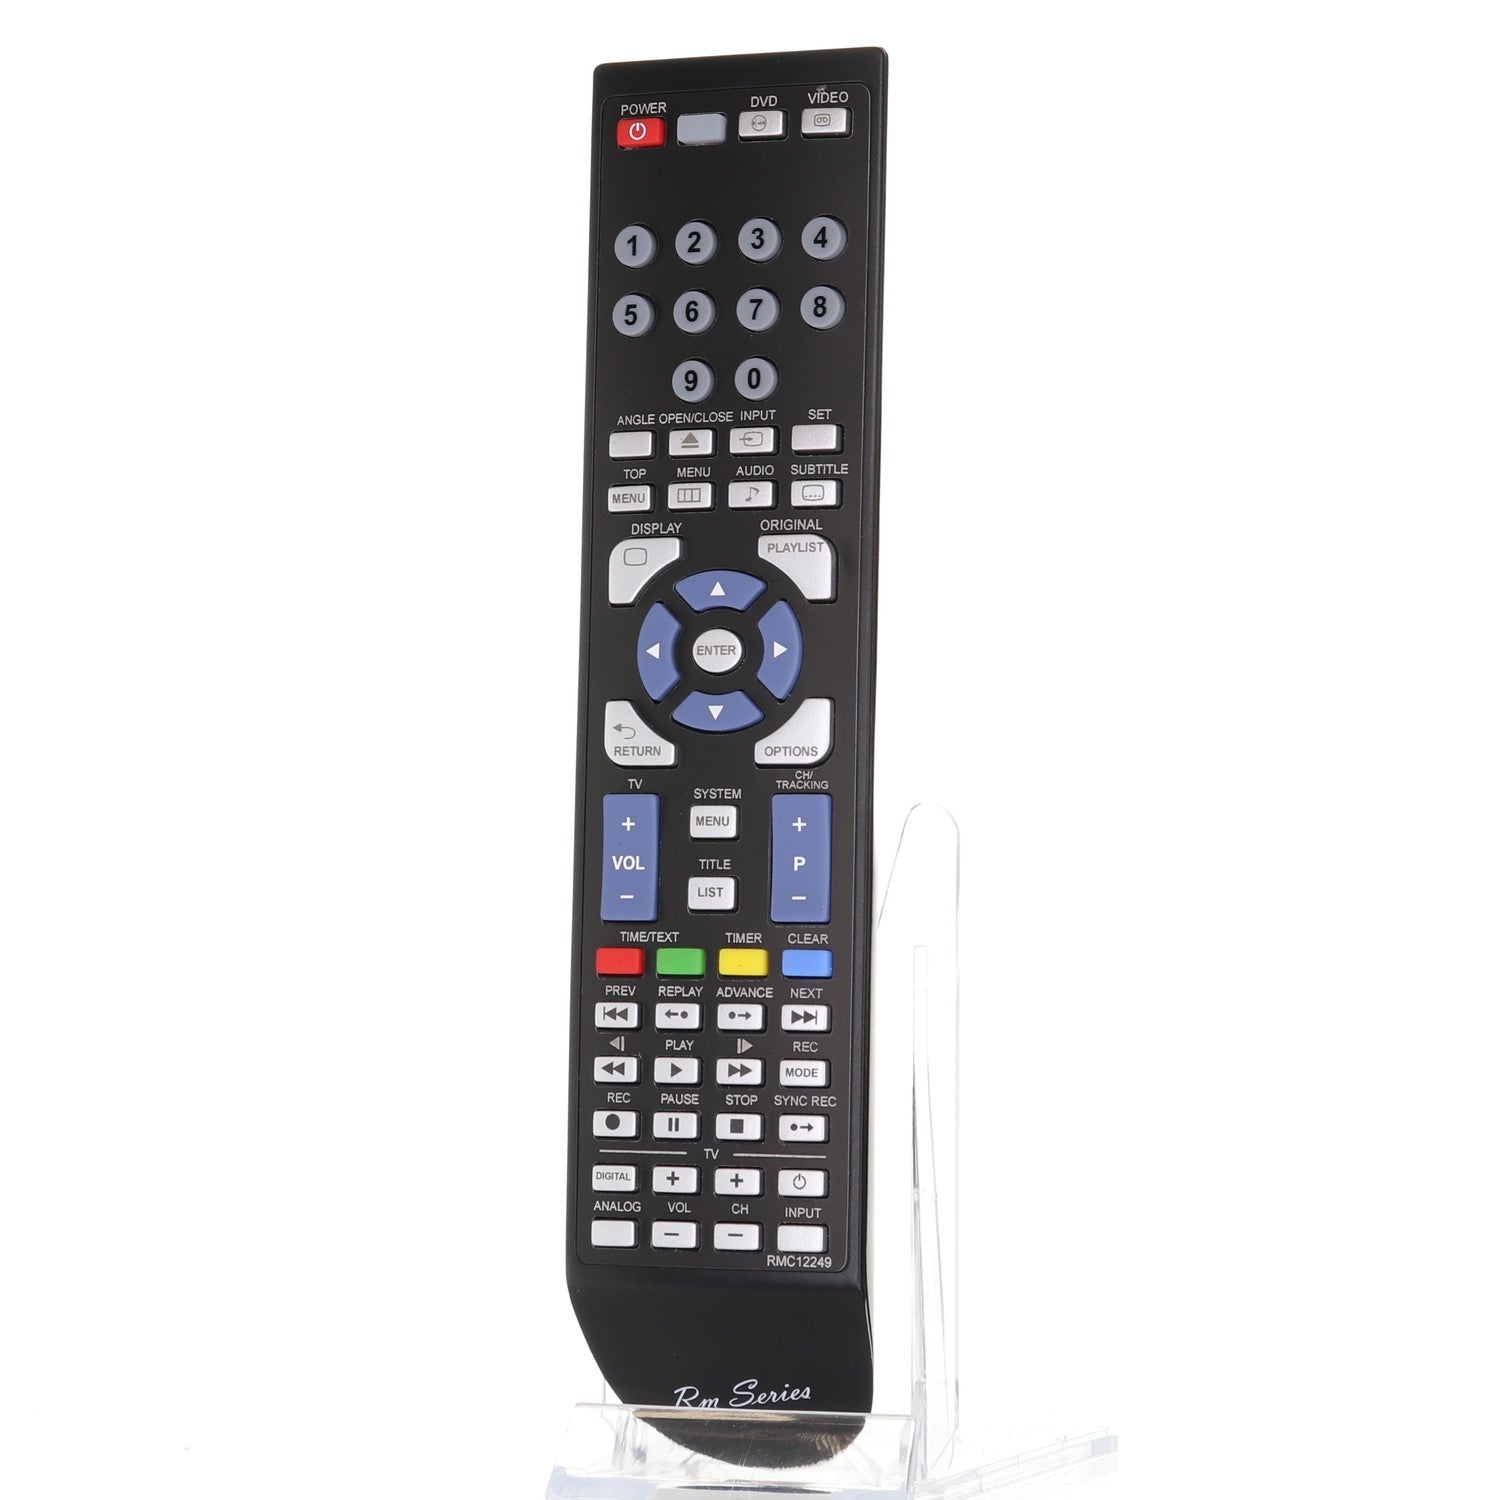 RMC12249 (RMTD240A) Remote Control for Sony® DVD/VHS Recorder Systems